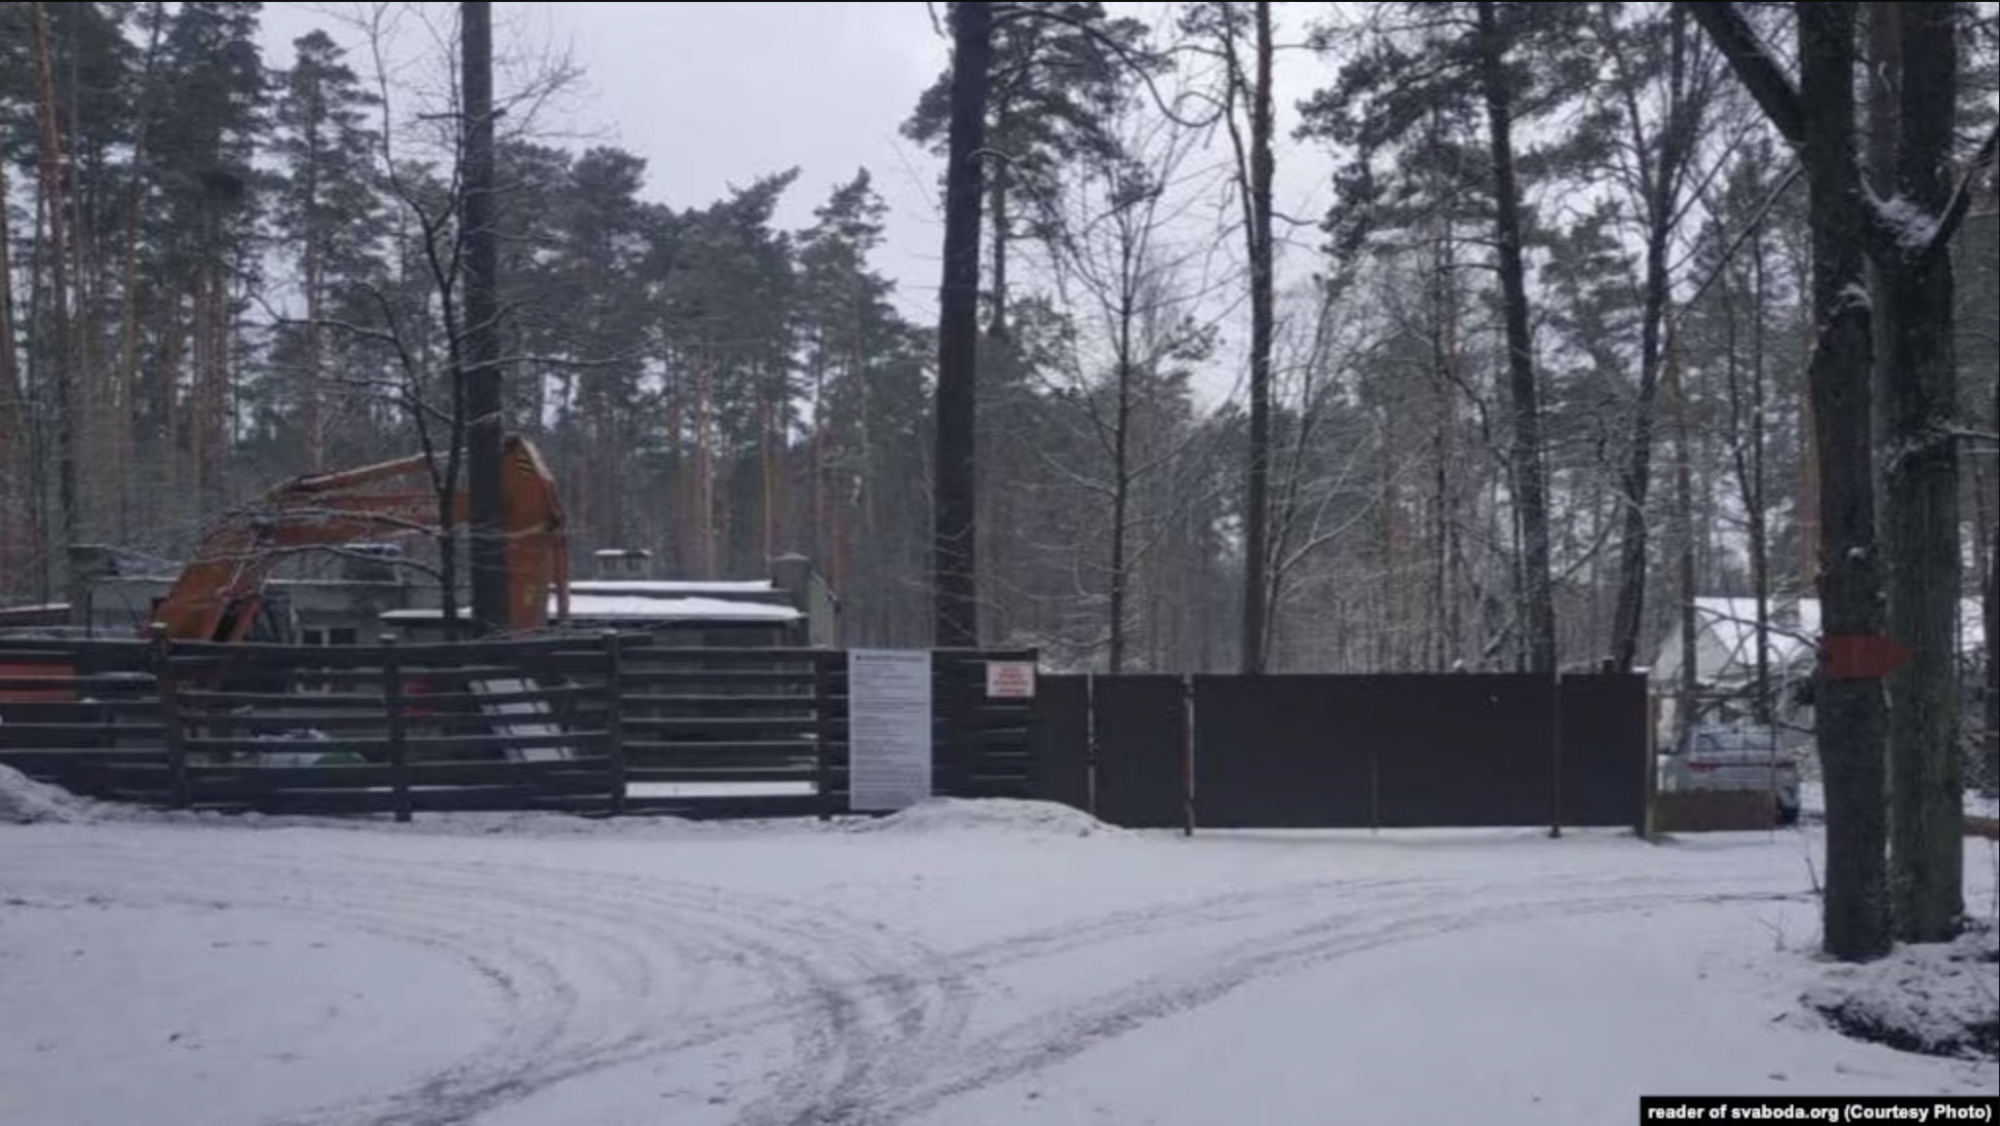 The Belarusian Defense Ministry is building a military town near the border with Ukraine. Photo